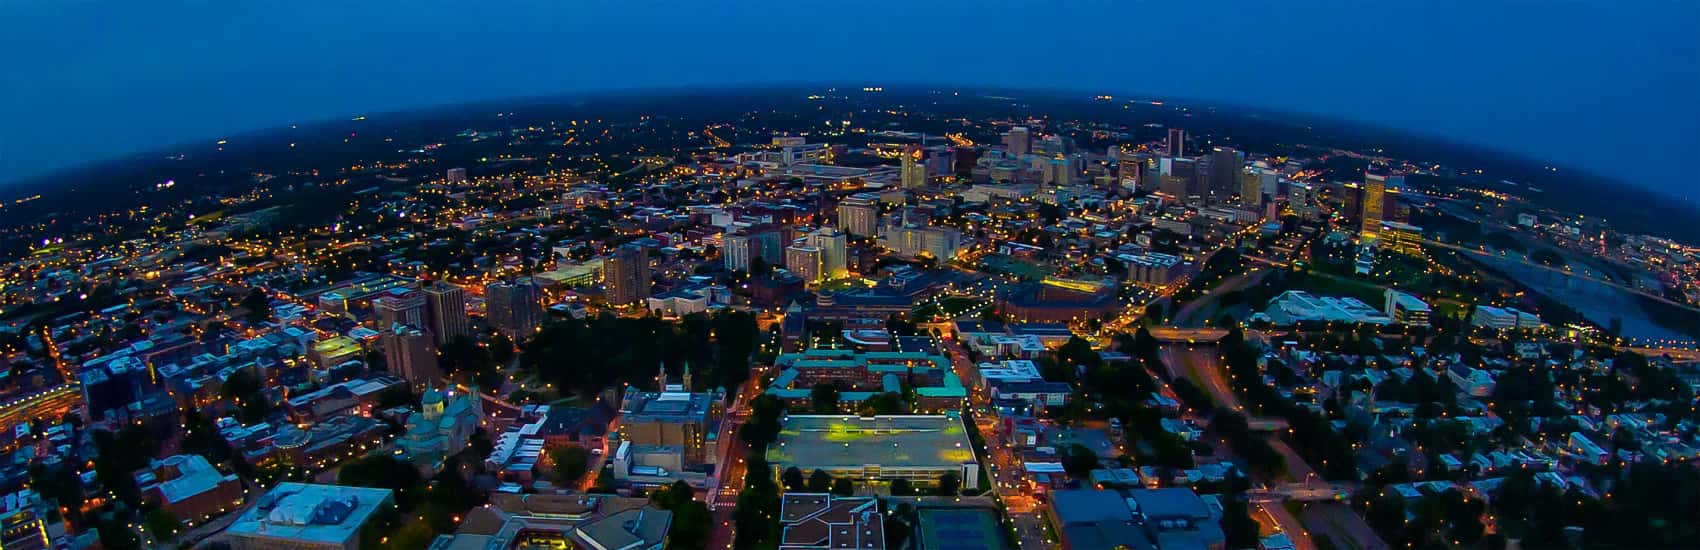 Nighttime aerial view of VCU campus and downtown Richmond